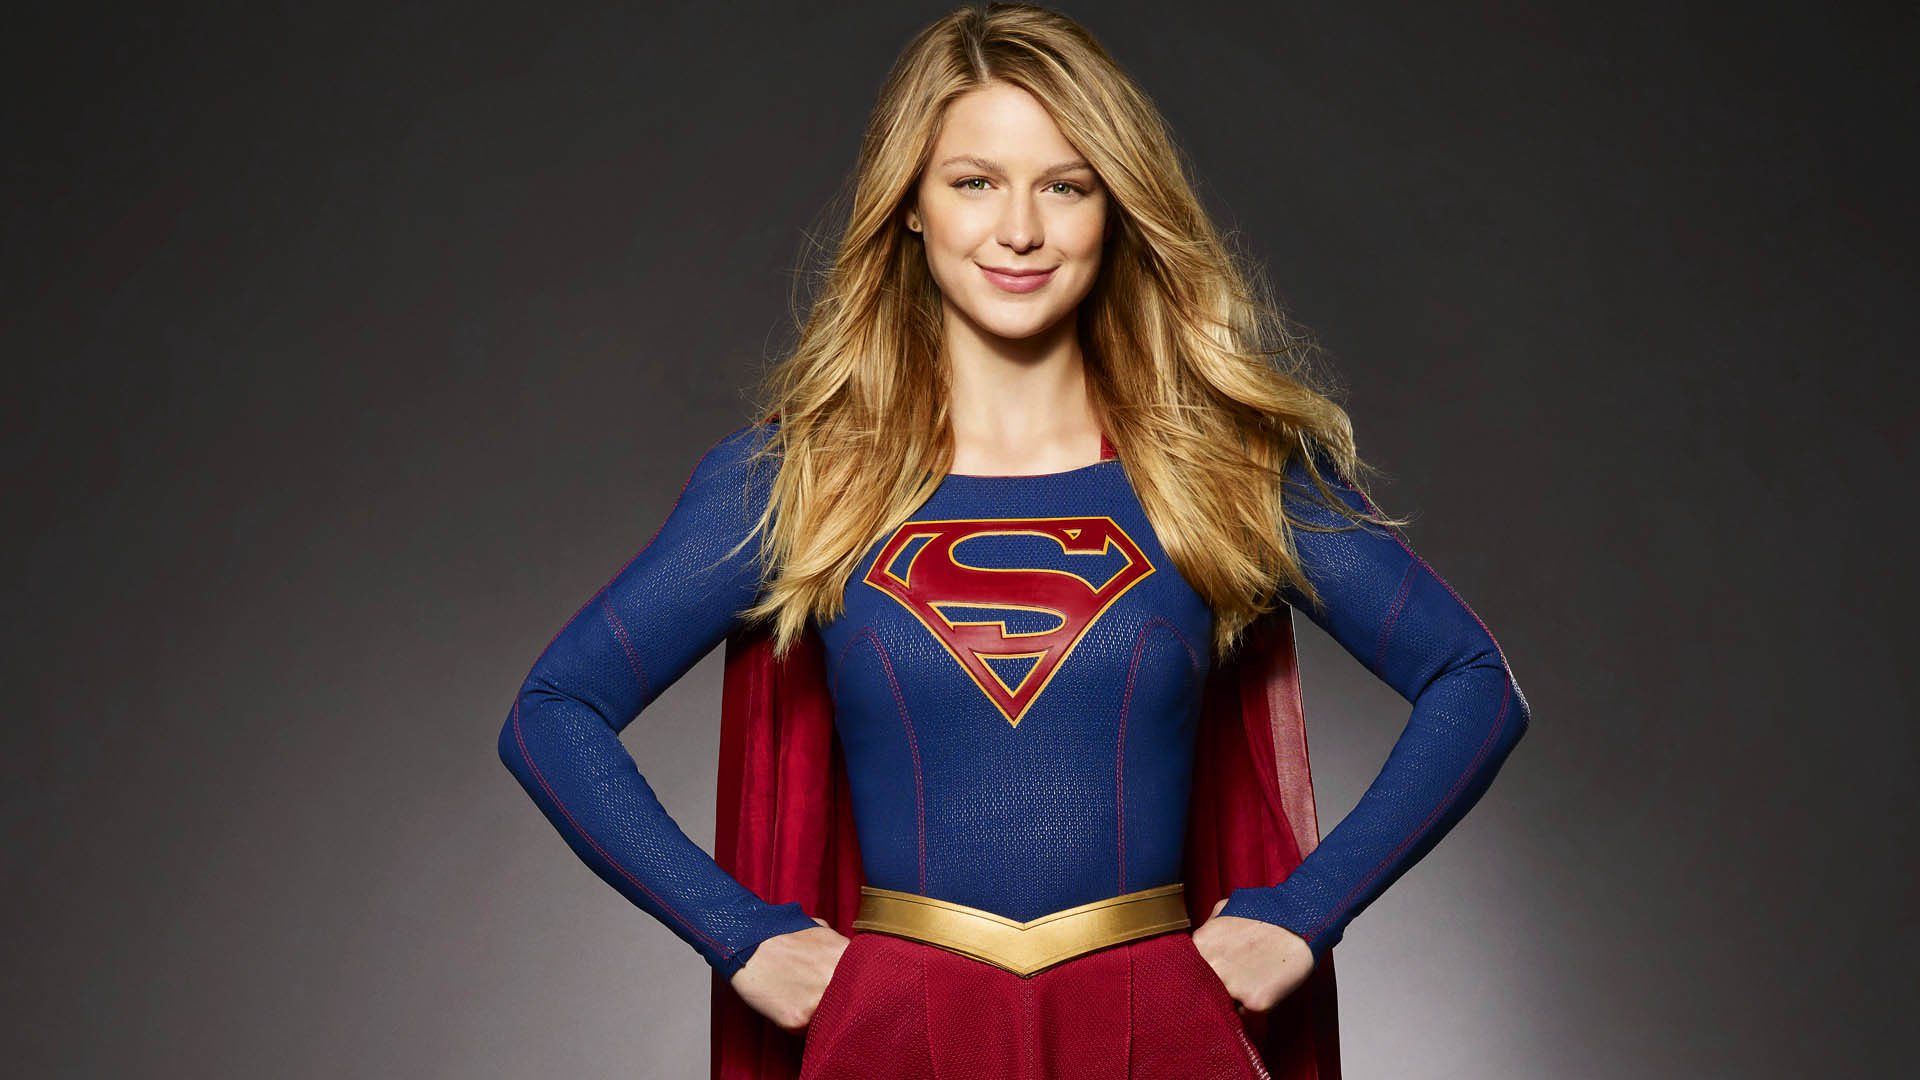 Cw's 'supergirl' is casting superman for s2